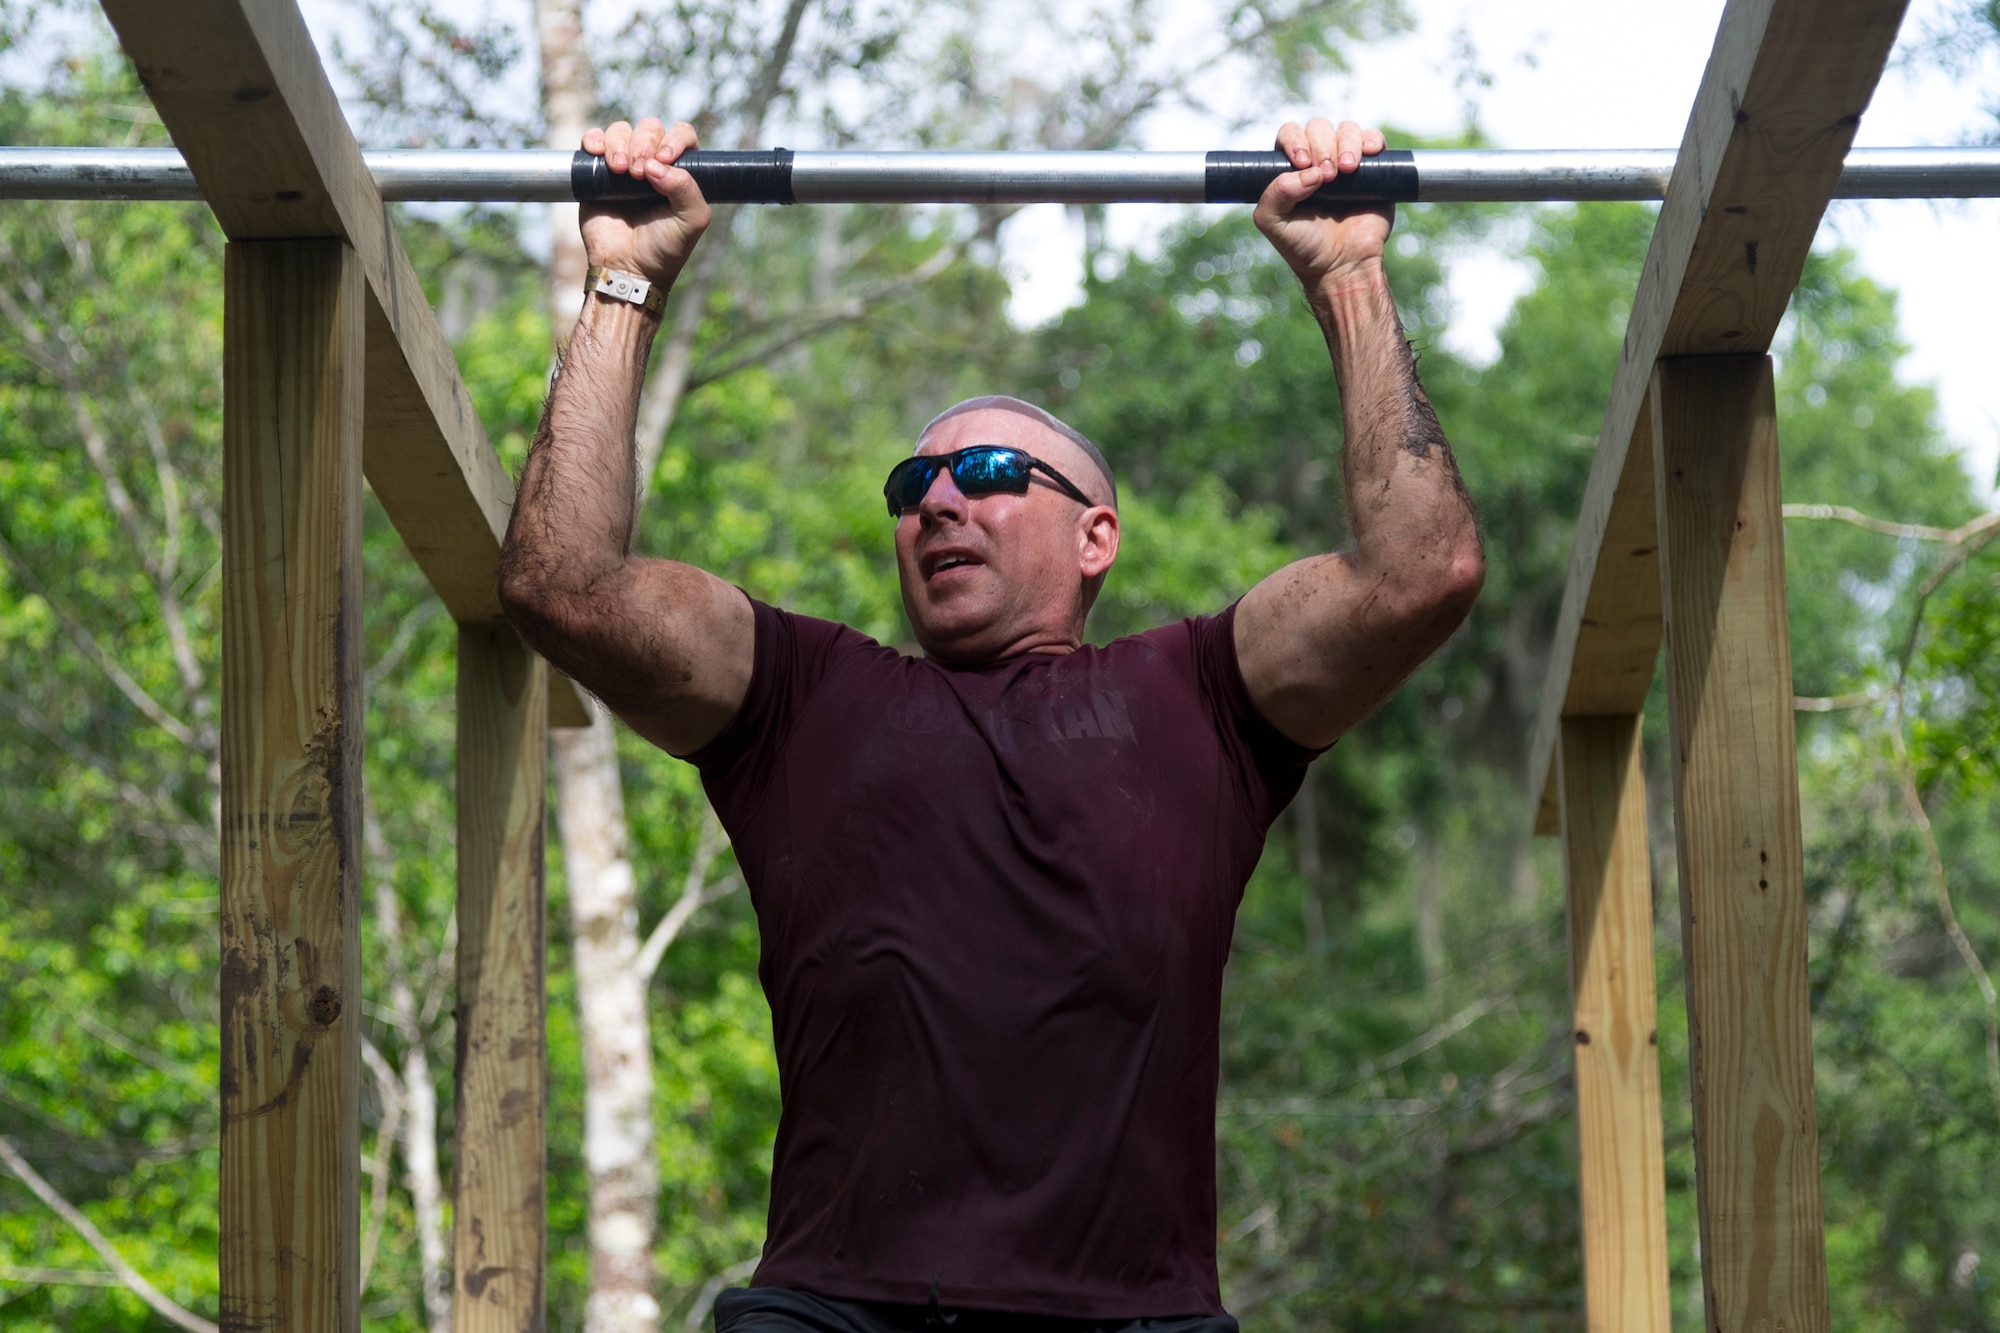 A participant shimmies across wooden planks during the Moody Mud Run, May 4, 2019, at Possum Creek Off-Road Park in Ray City, Ga. The sixth annual Moody Mud Run had approximately 850 participants who had to overcome a series of obstacles on the 4 and 5-mile courses. The 32-obstacle course gave Airmen, families and the local community an opportunity to build camaraderie and teamwork skills. (U.S. Air Force Photo by Airman 1st Class Taryn Butler)